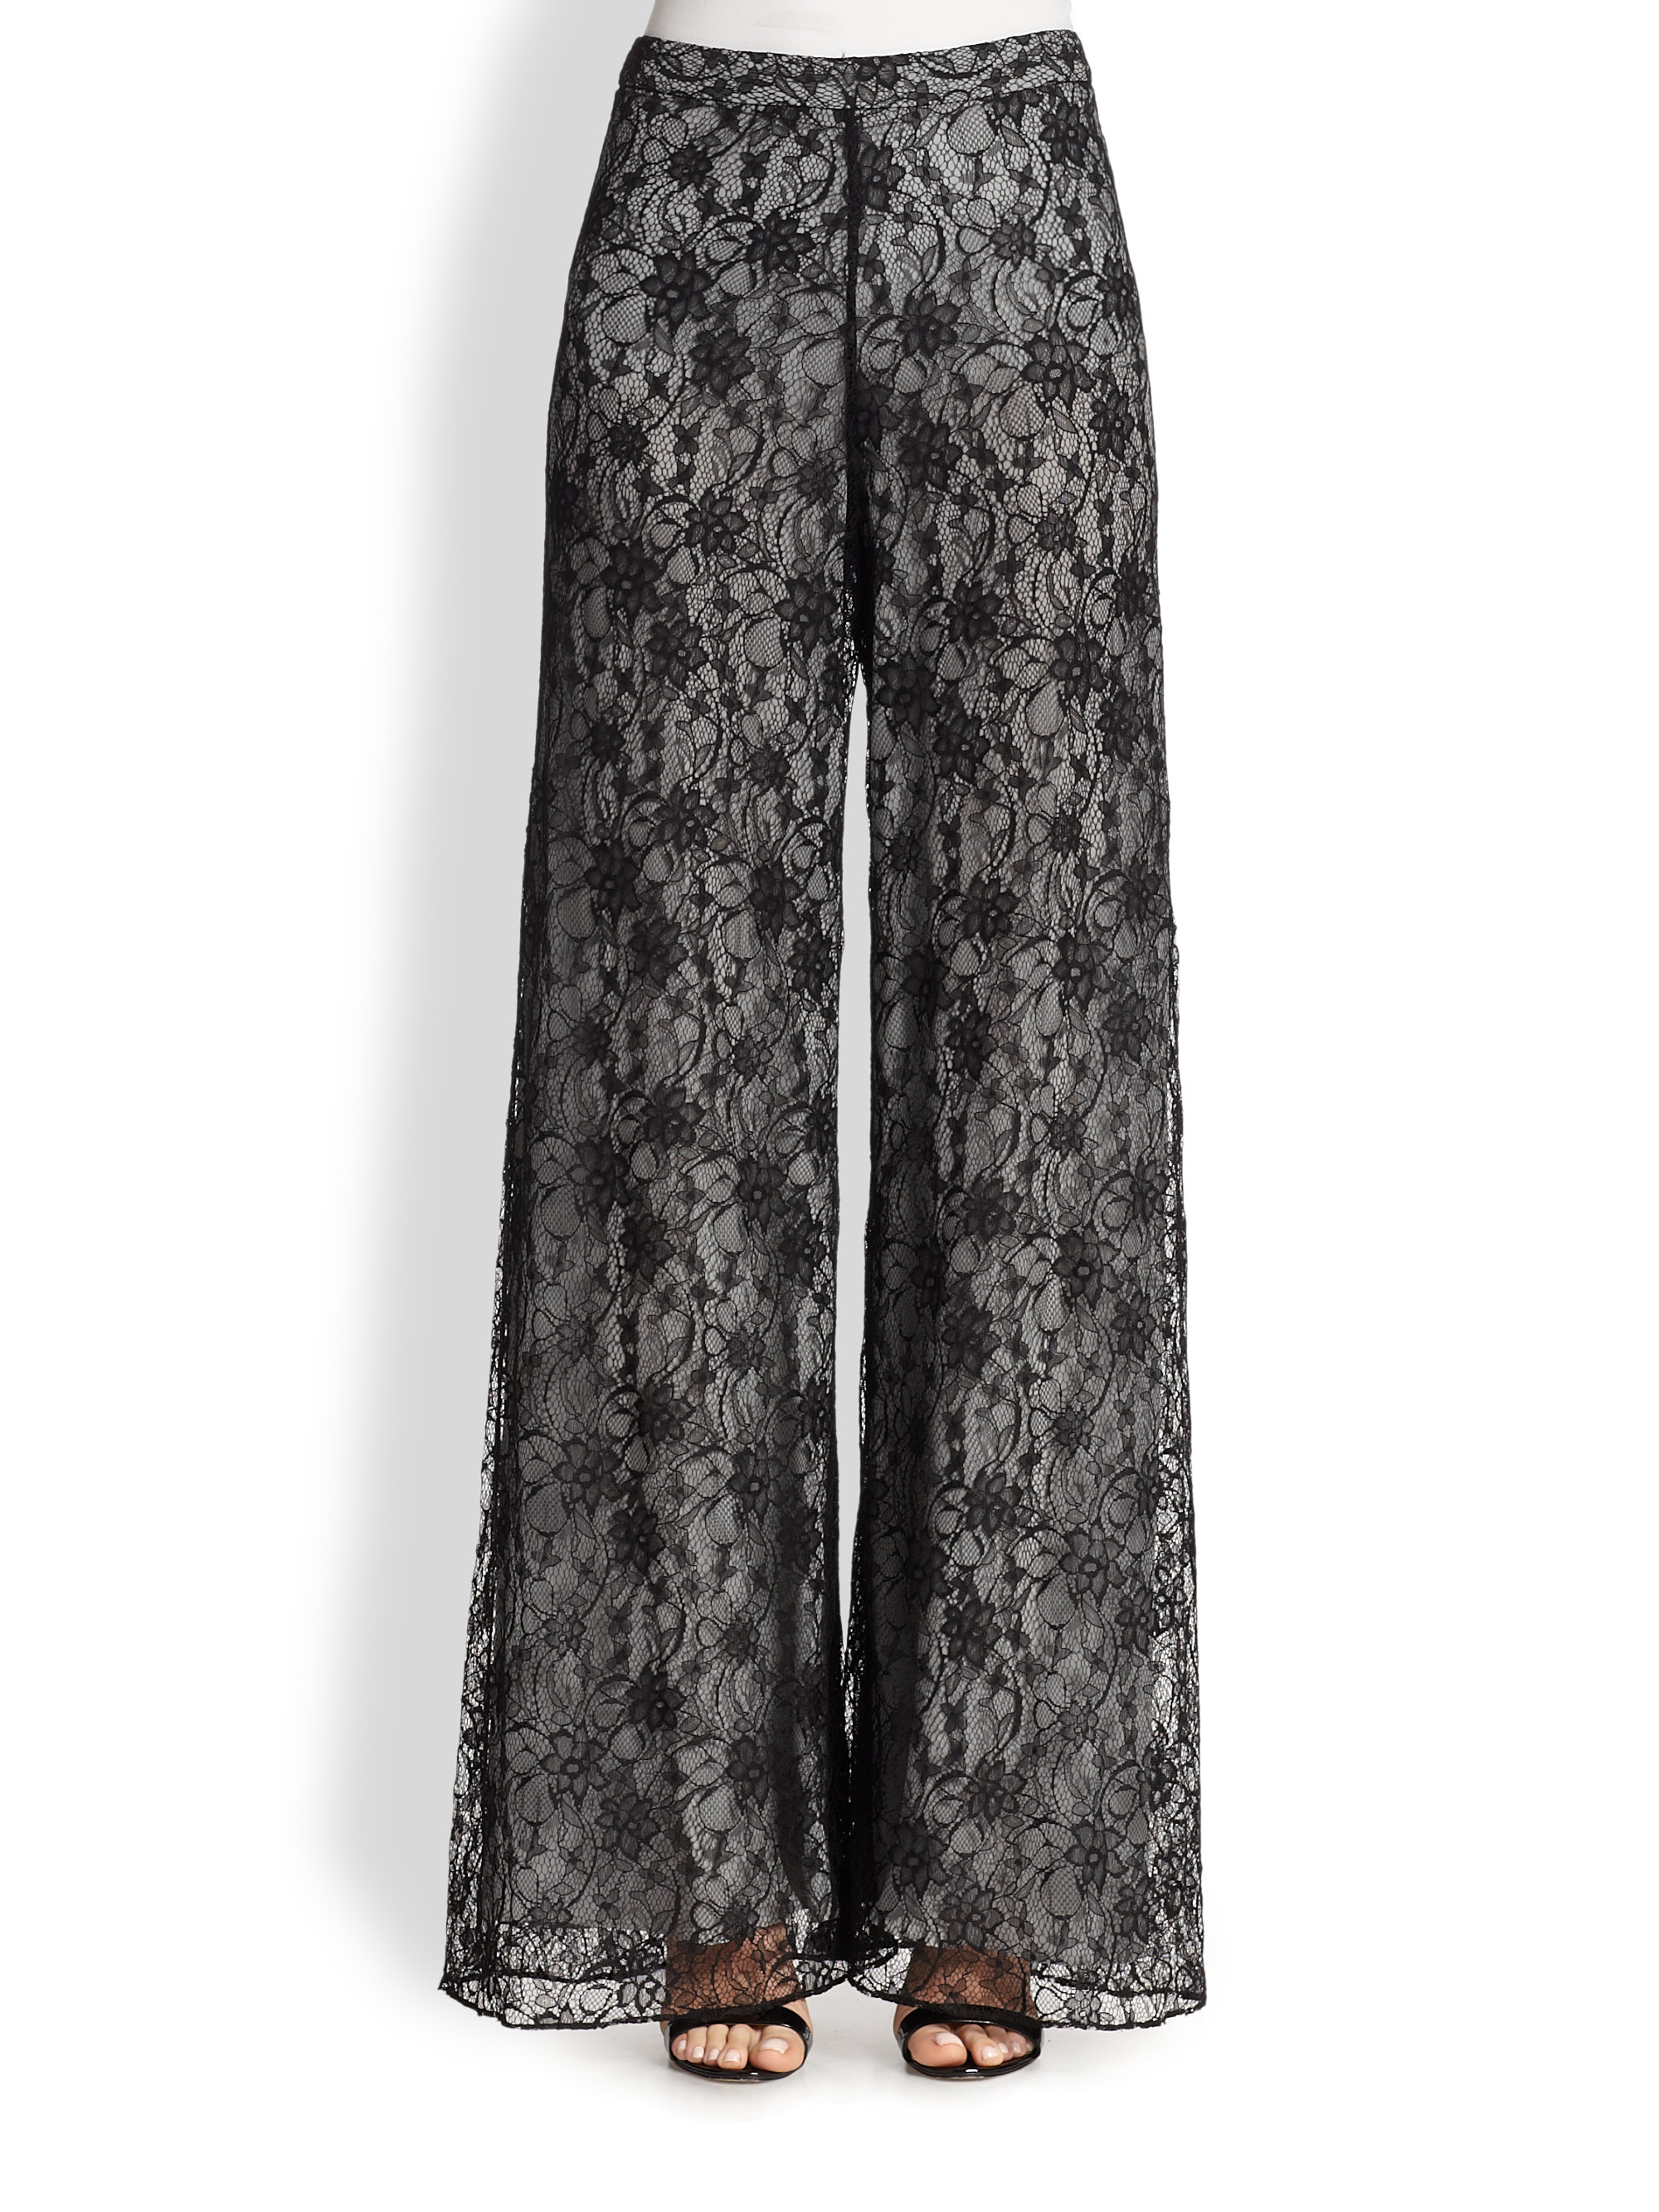 Lyst - Alice + Olivia Super Flared Wide-Leg Lace Pants in Black